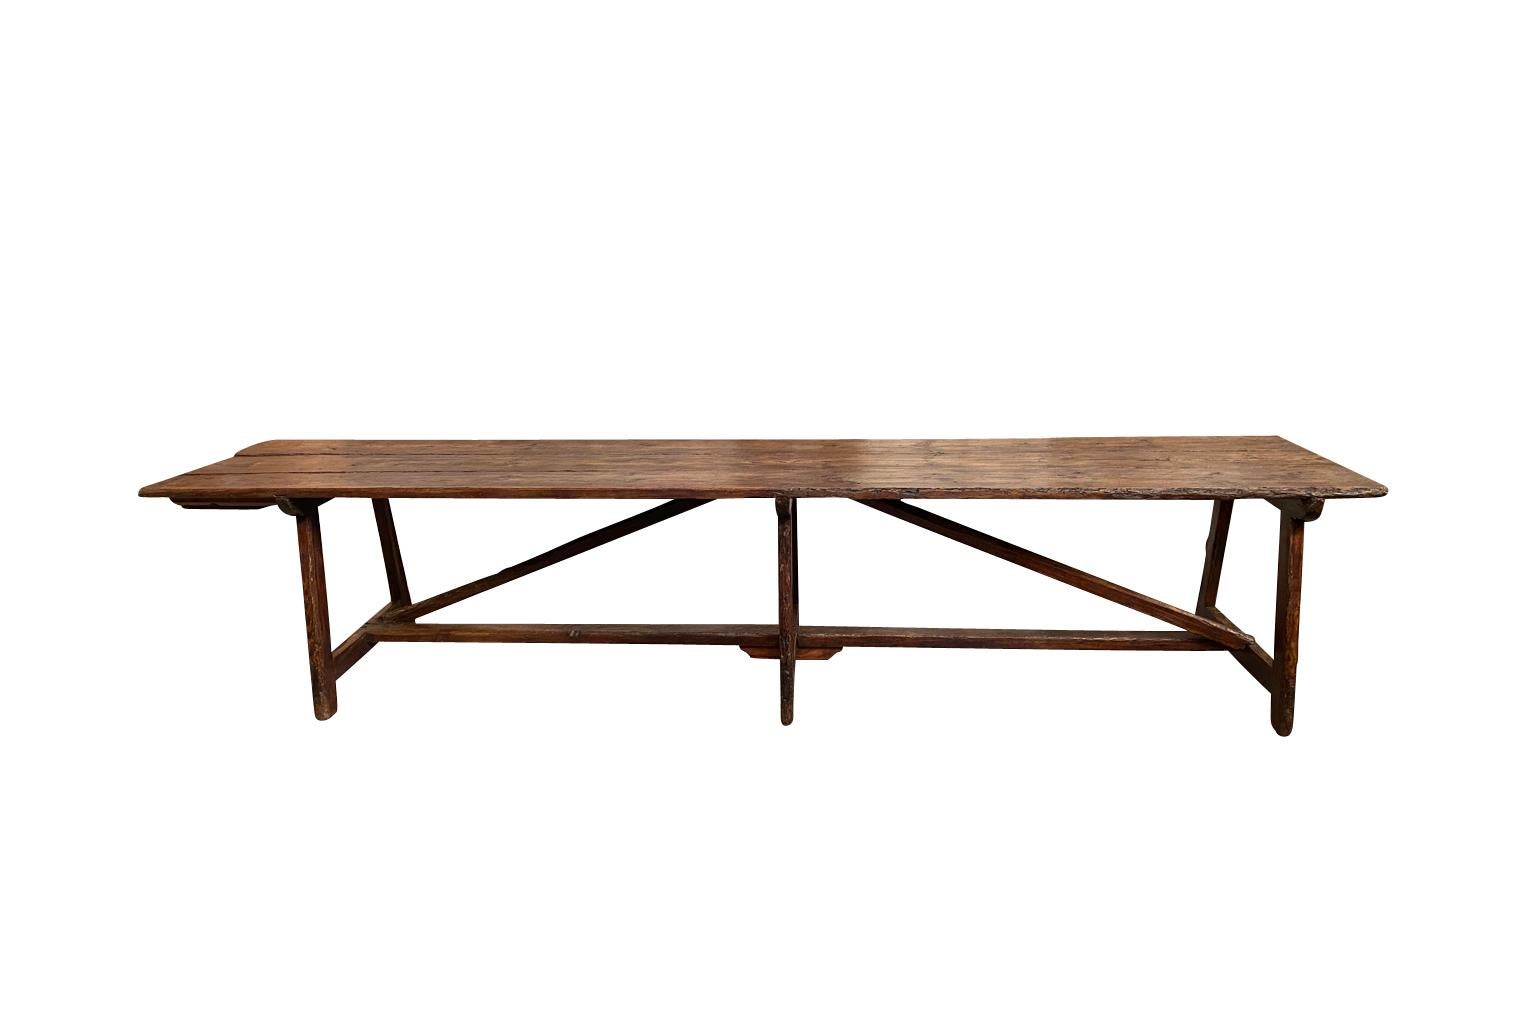 An outstanding and grand scale 18th century Italian farm table from the Piedmont region. Soundly constructed from richly stained pine with attractive cross stretchers and a single drawer to one end. A perfect table to host a large gathering.